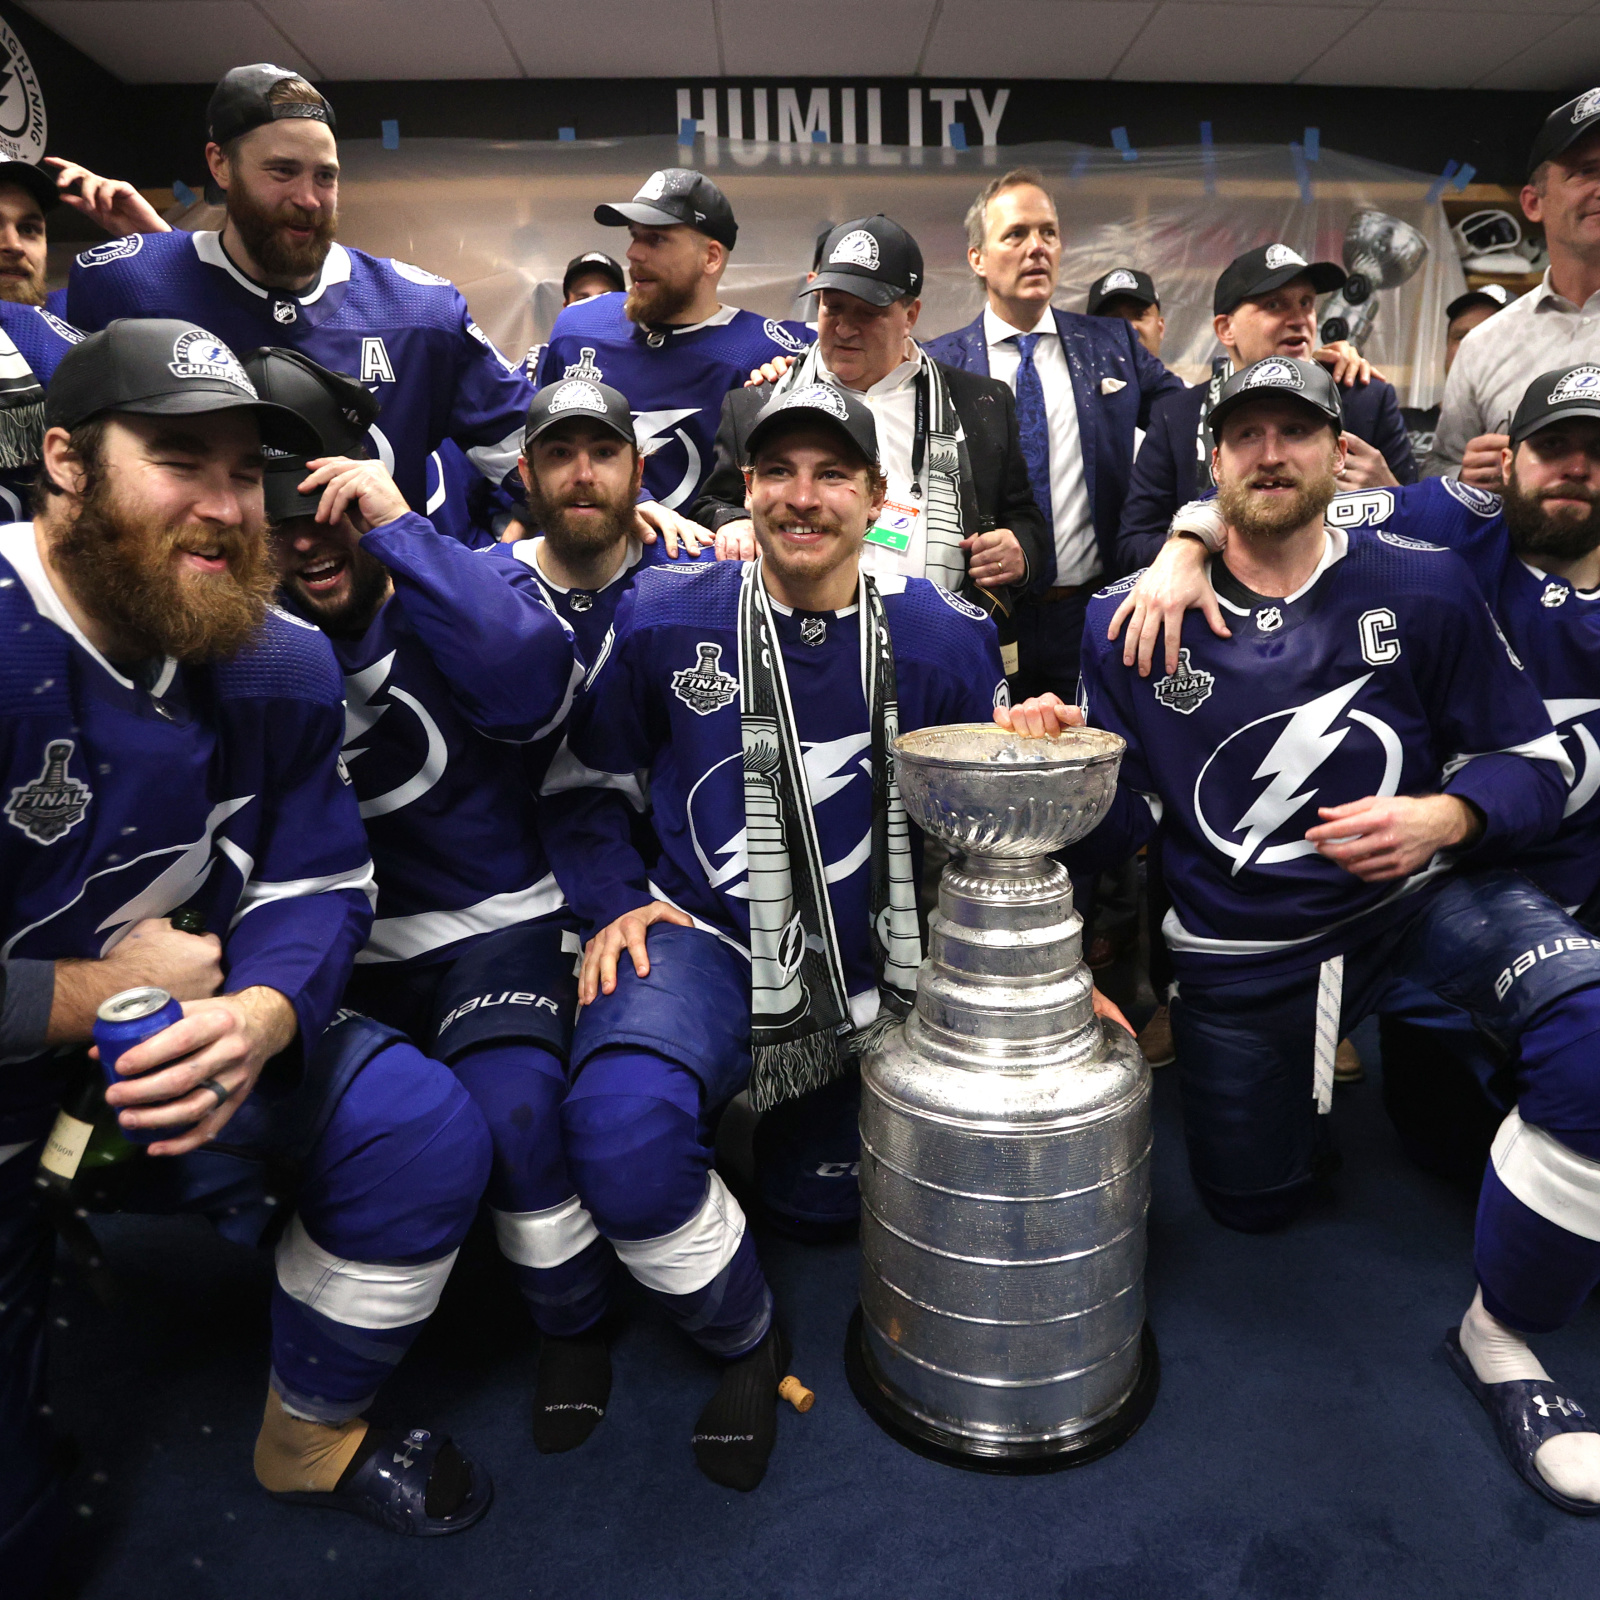 Lightning Celebrates Its Back-To-Back Stanley Cup Wins With Boat